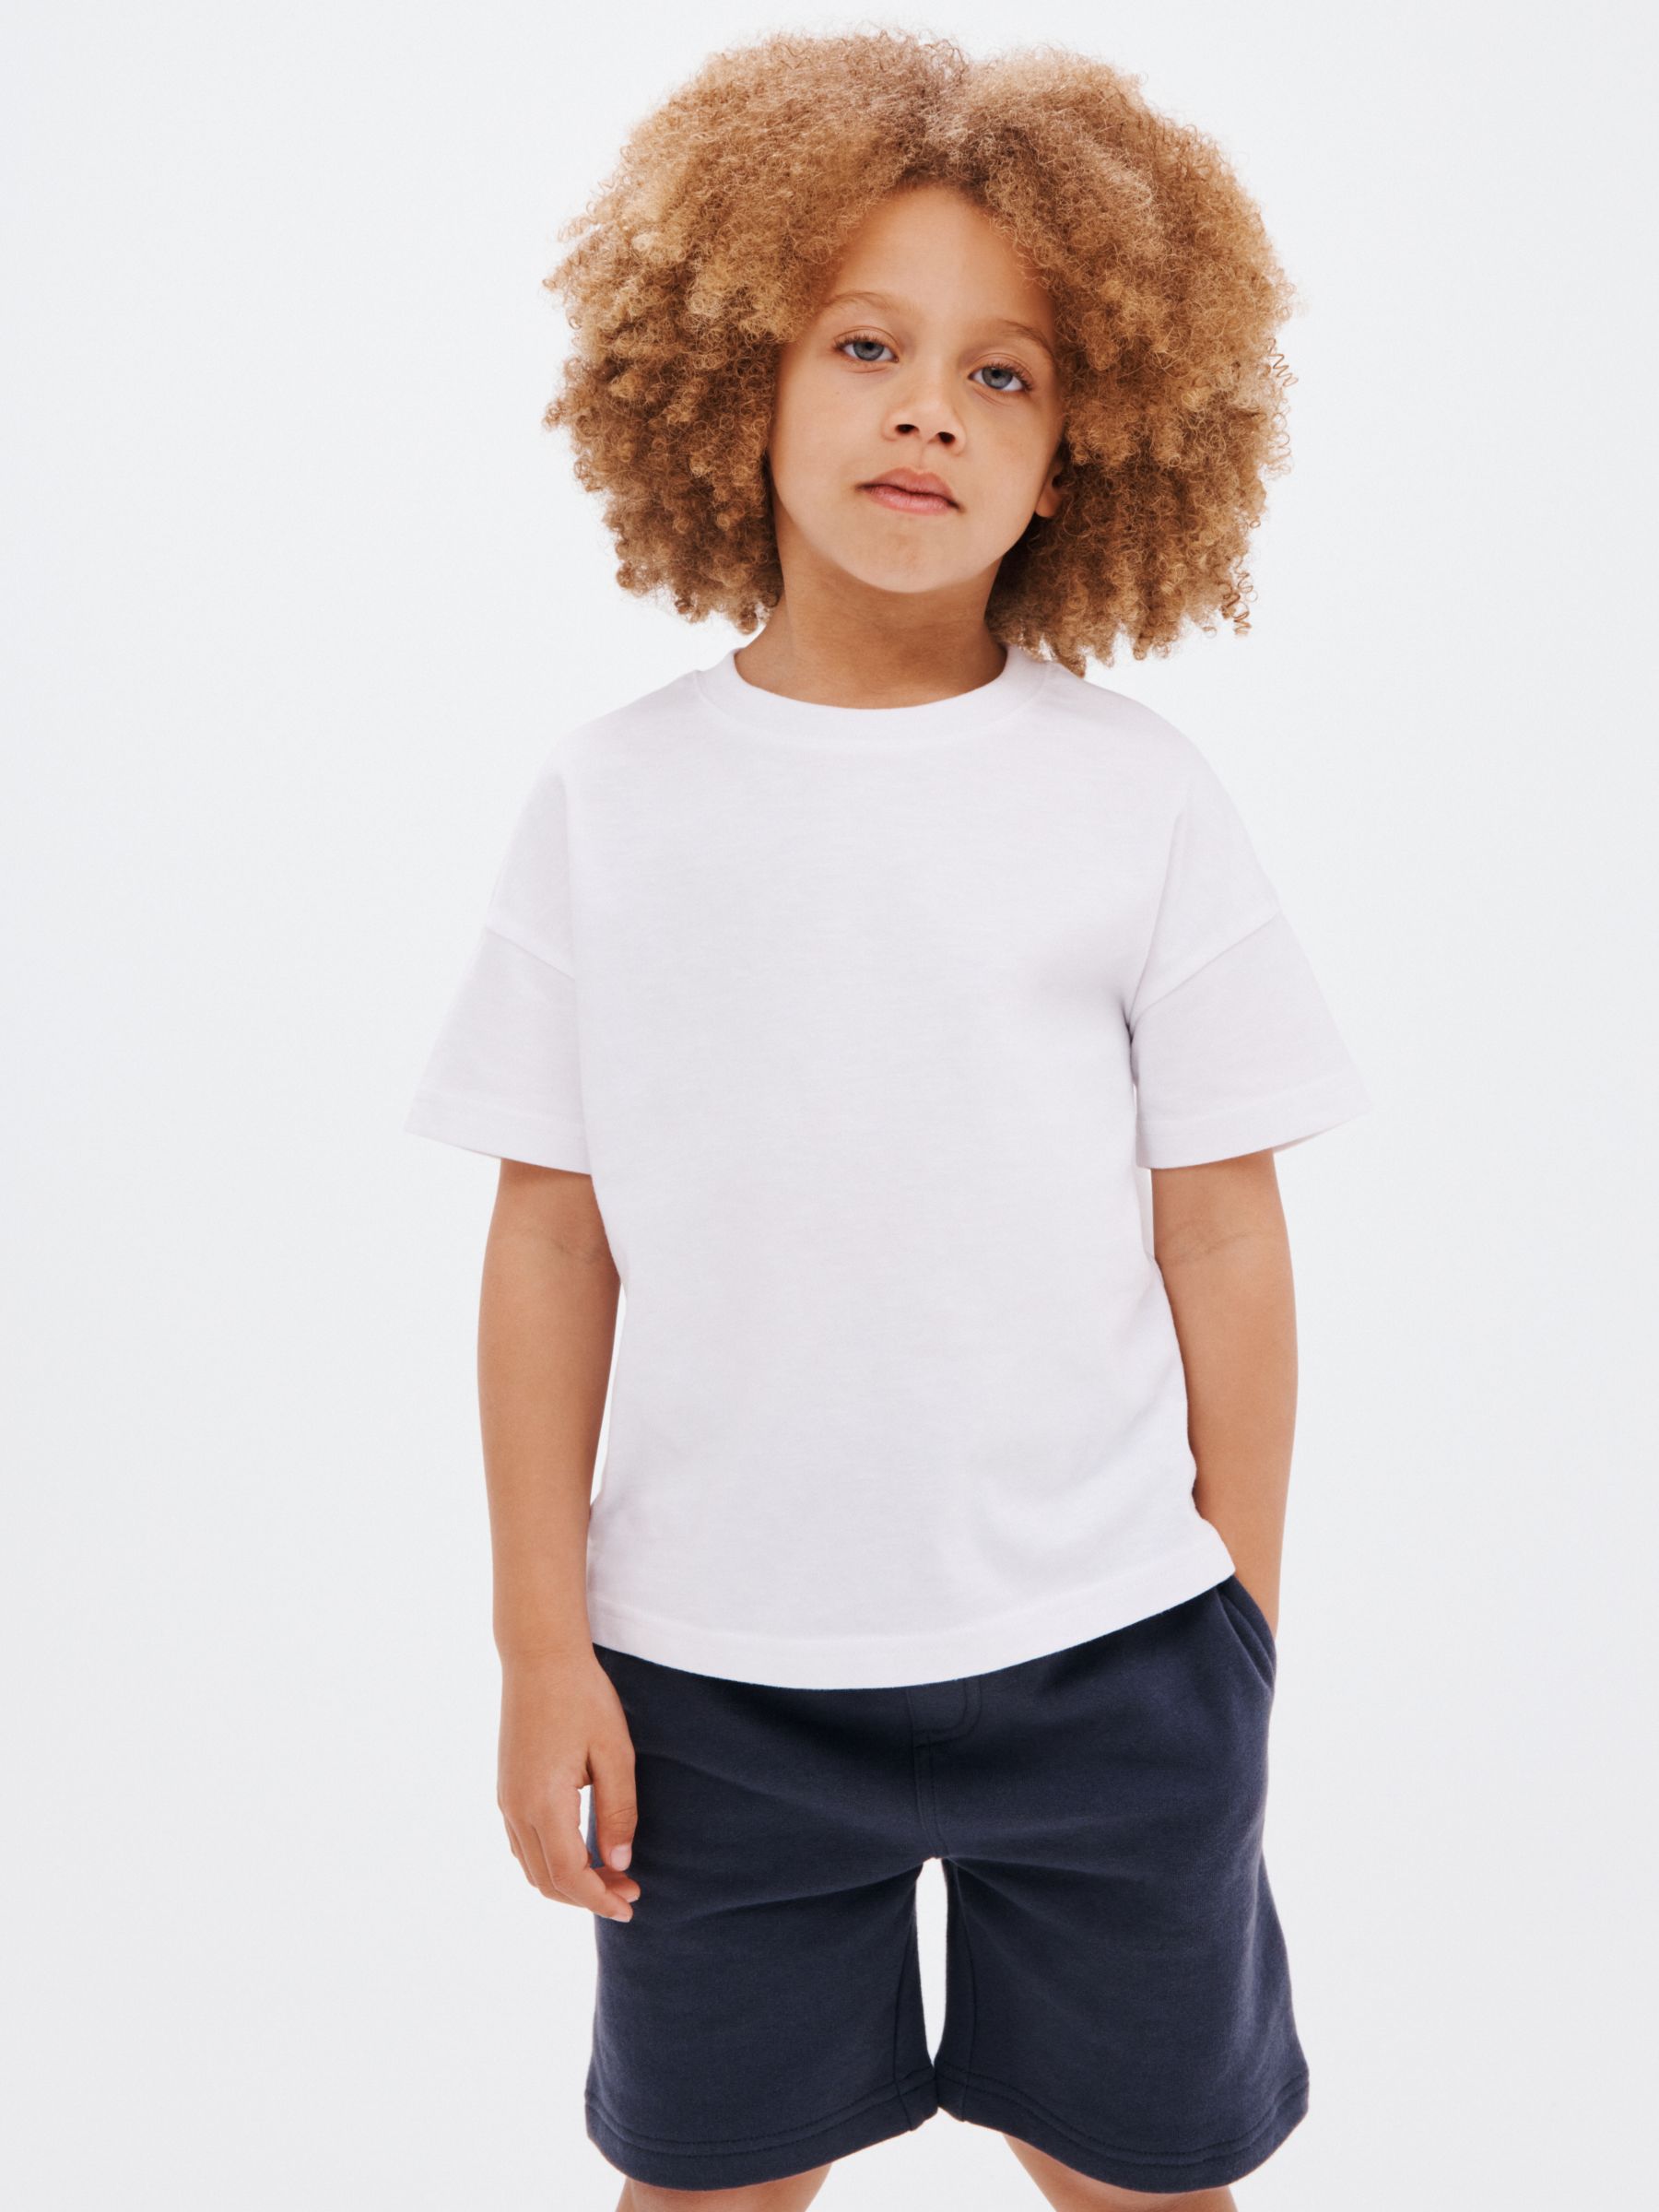 John Lewis ANYDAY Kids' Lace Crop Tops, Pack of 2, White at John